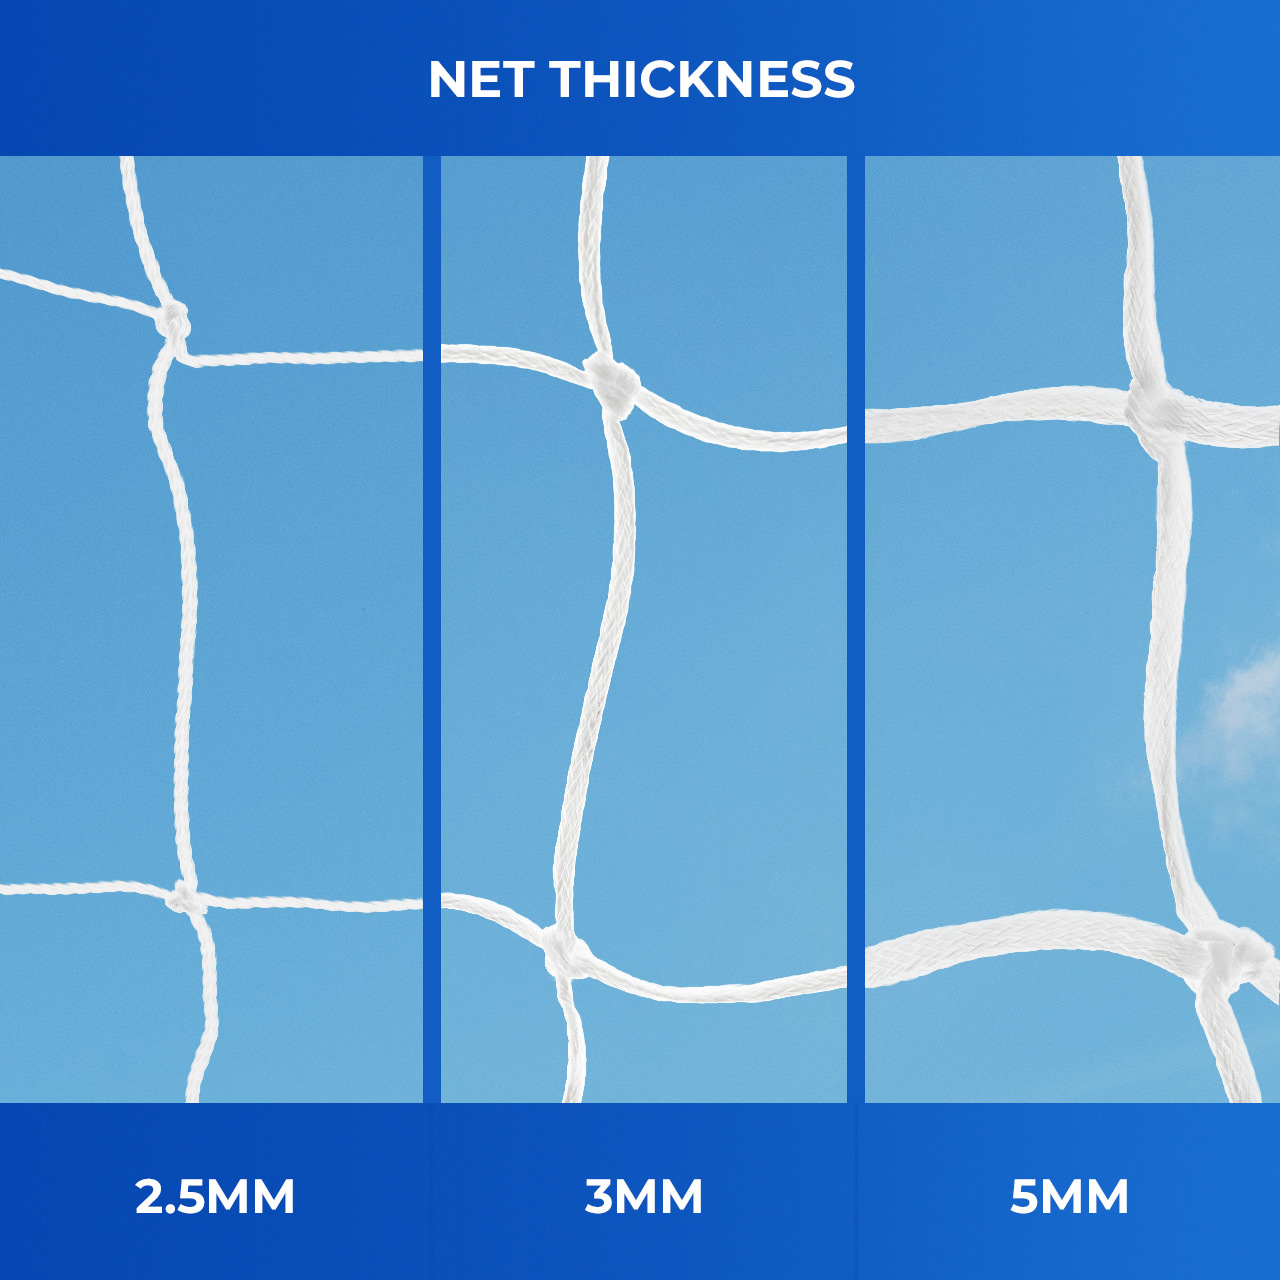 12 X 4 REPLACEMENT SOCCER GOAL NETS [Style: Standard] [Size:: 3.7m x 1.2m x 0.4m x 1.2m] [Thickness:: 3mm | White]